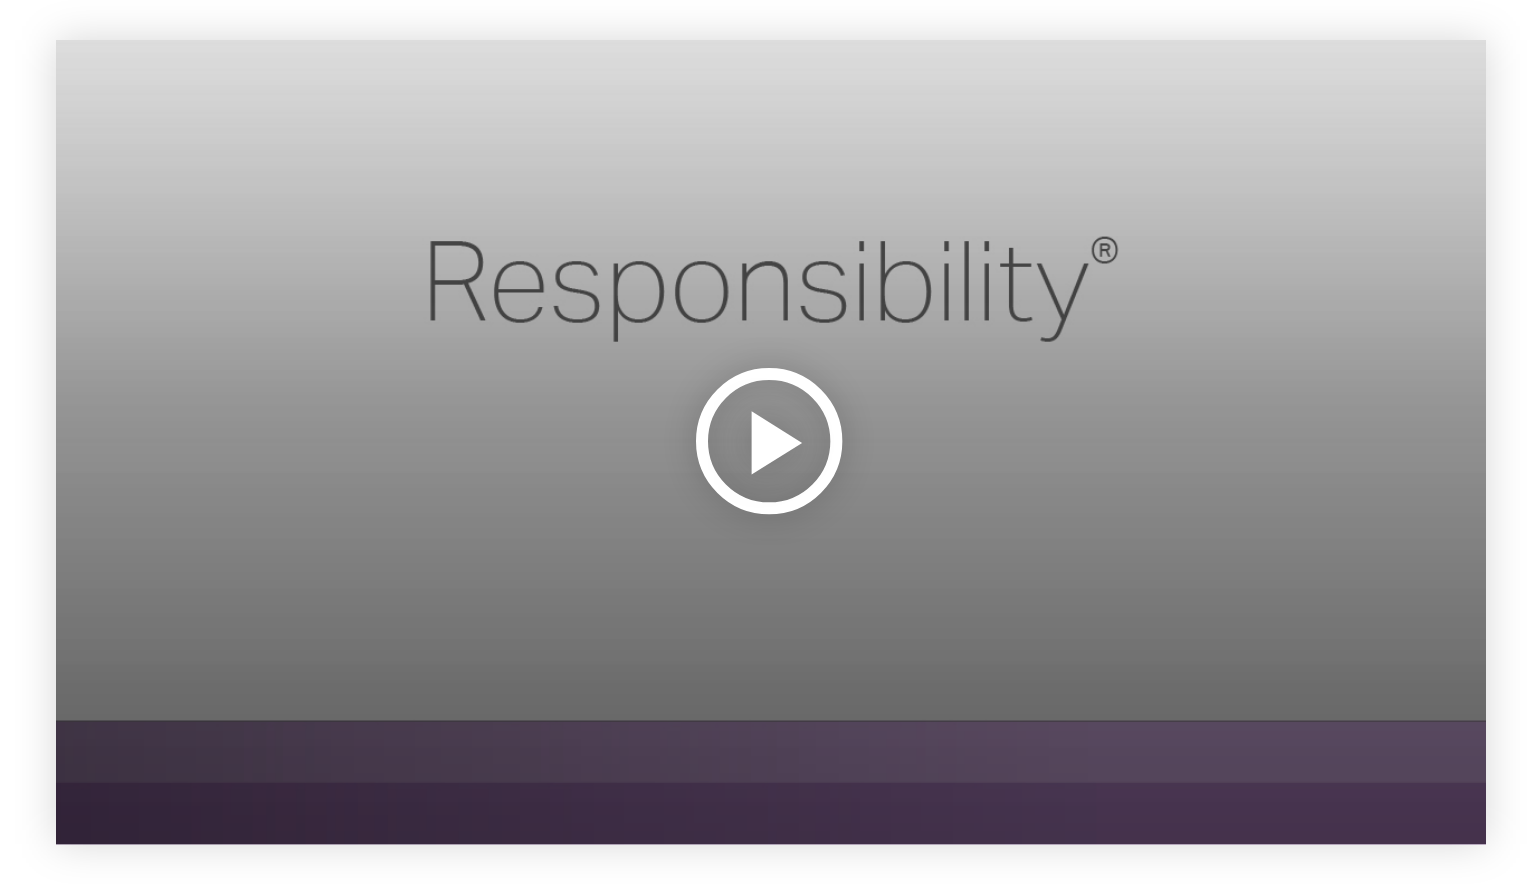 Play video - Responsibility - Learn more about your innate talents from Gallup's Clifton StrengthsFinder!